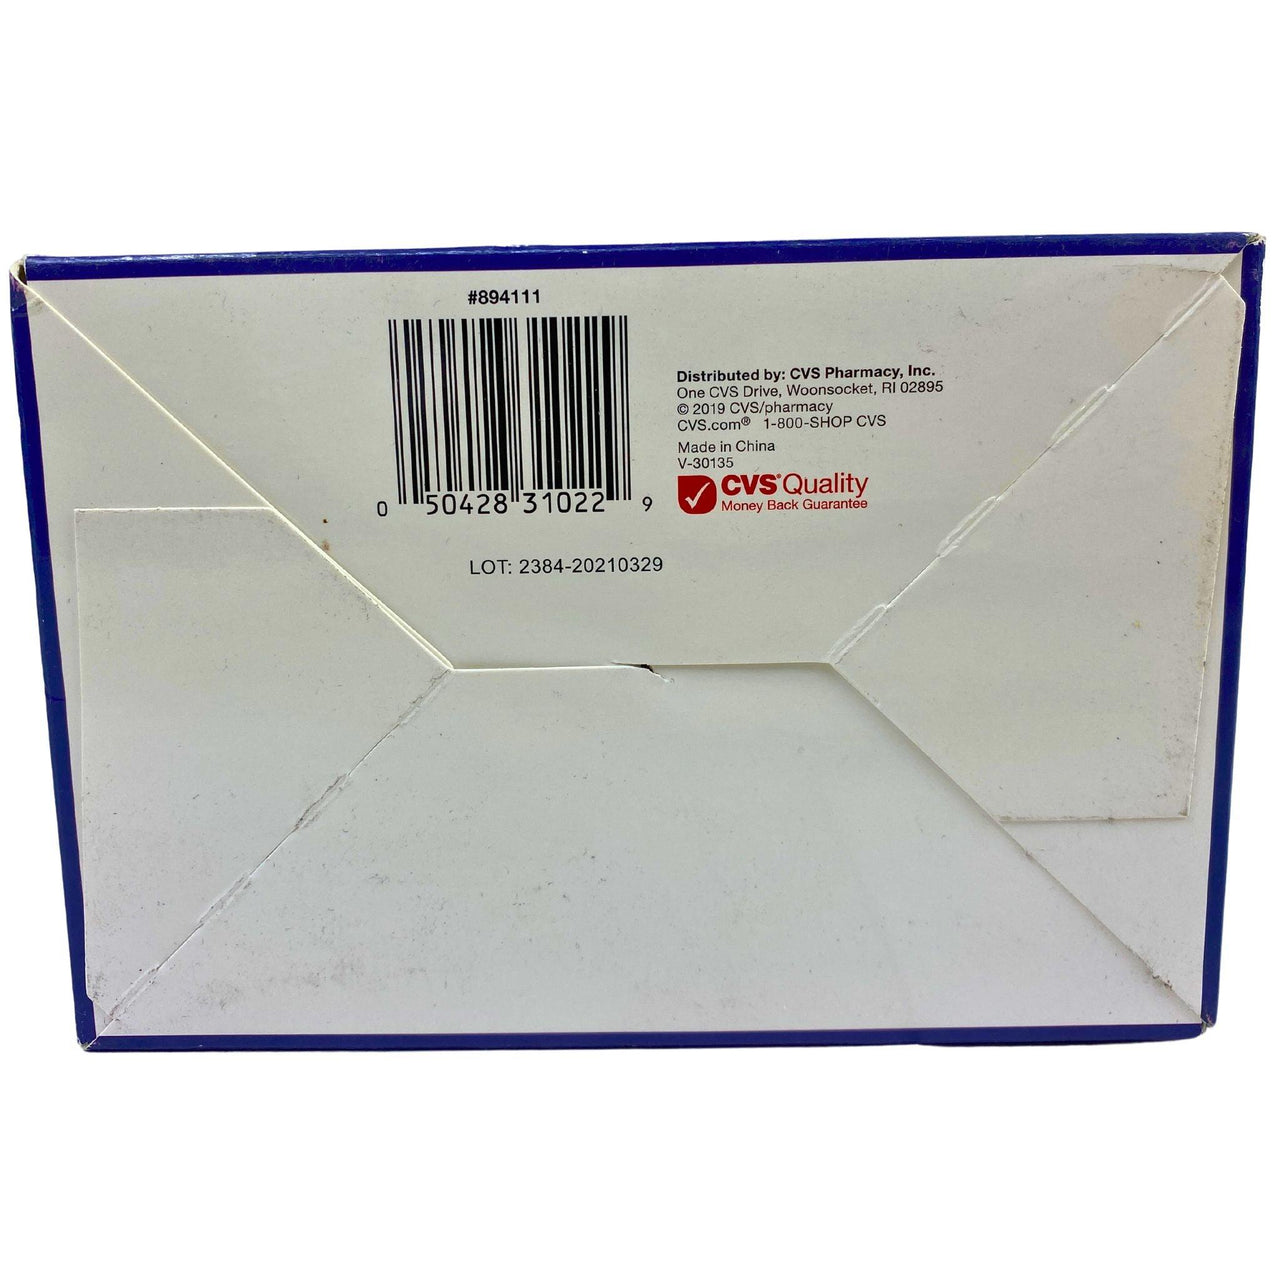 Sterile Surgical Pads Cushion Comfort all one size 5INx9IN (60 Pcs Lot) - Discount Wholesalers Inc